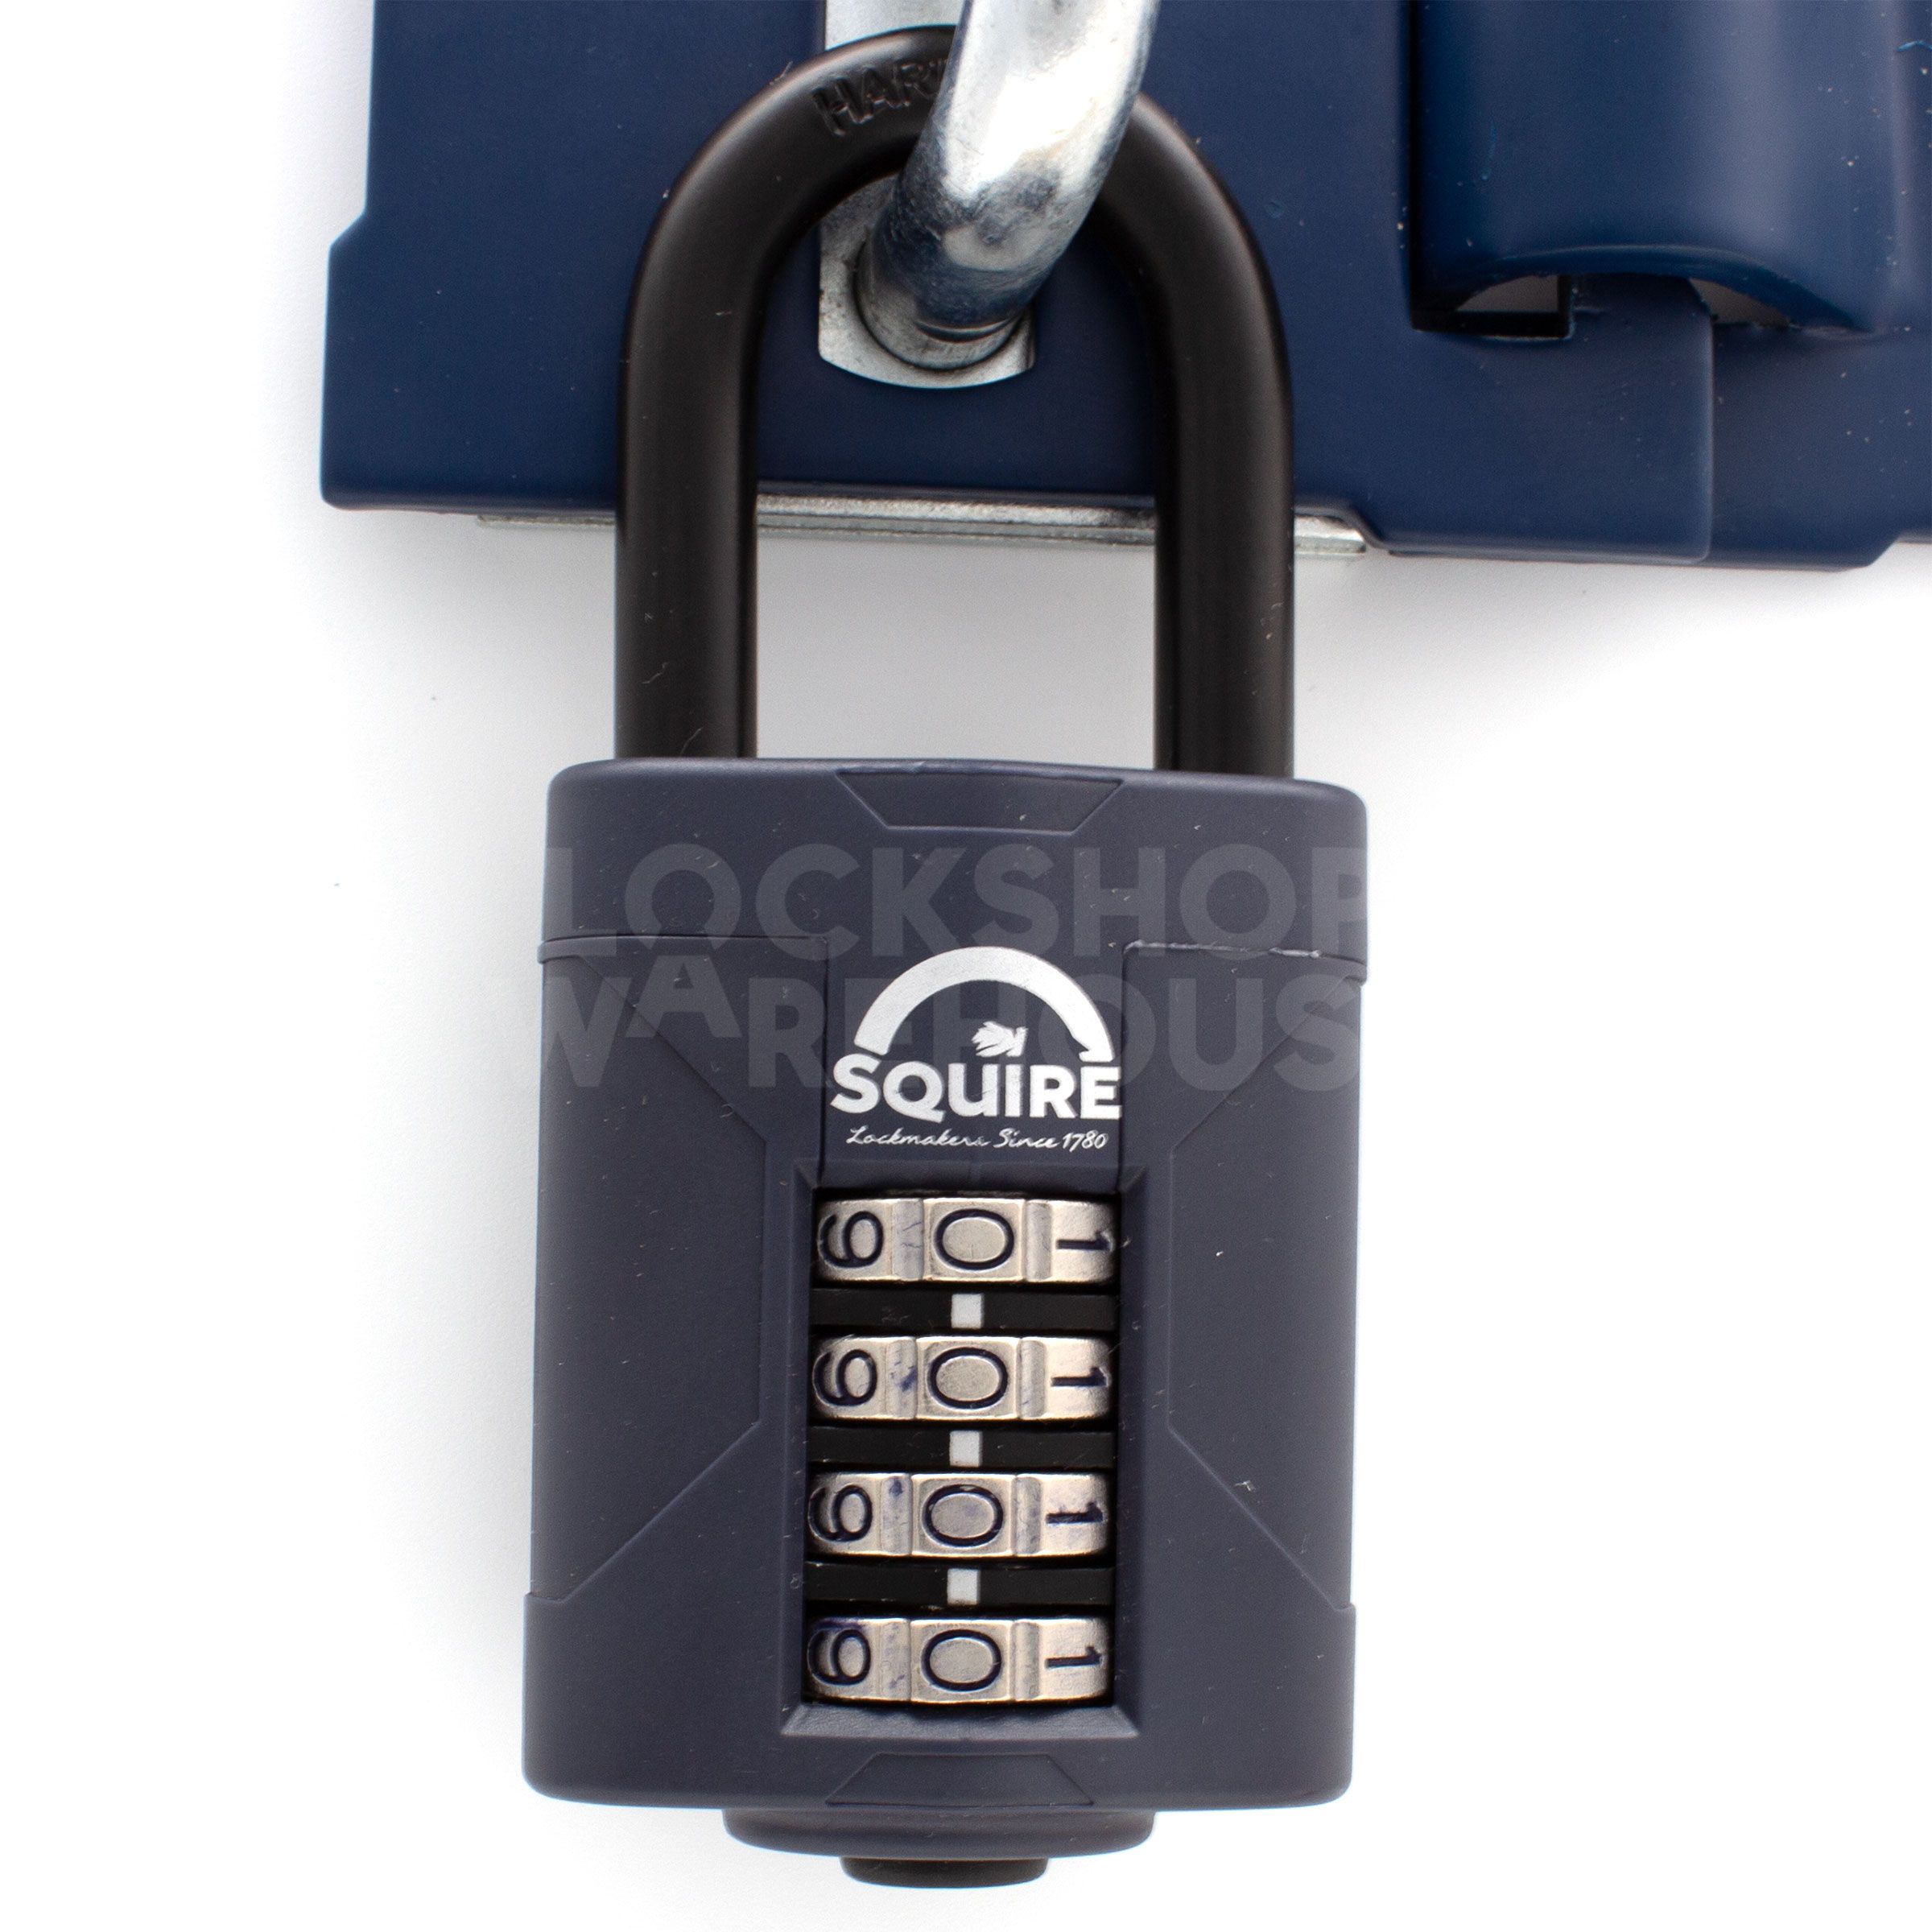 Squire CP50/1.5 Recodable Long shackle Combination Padlock